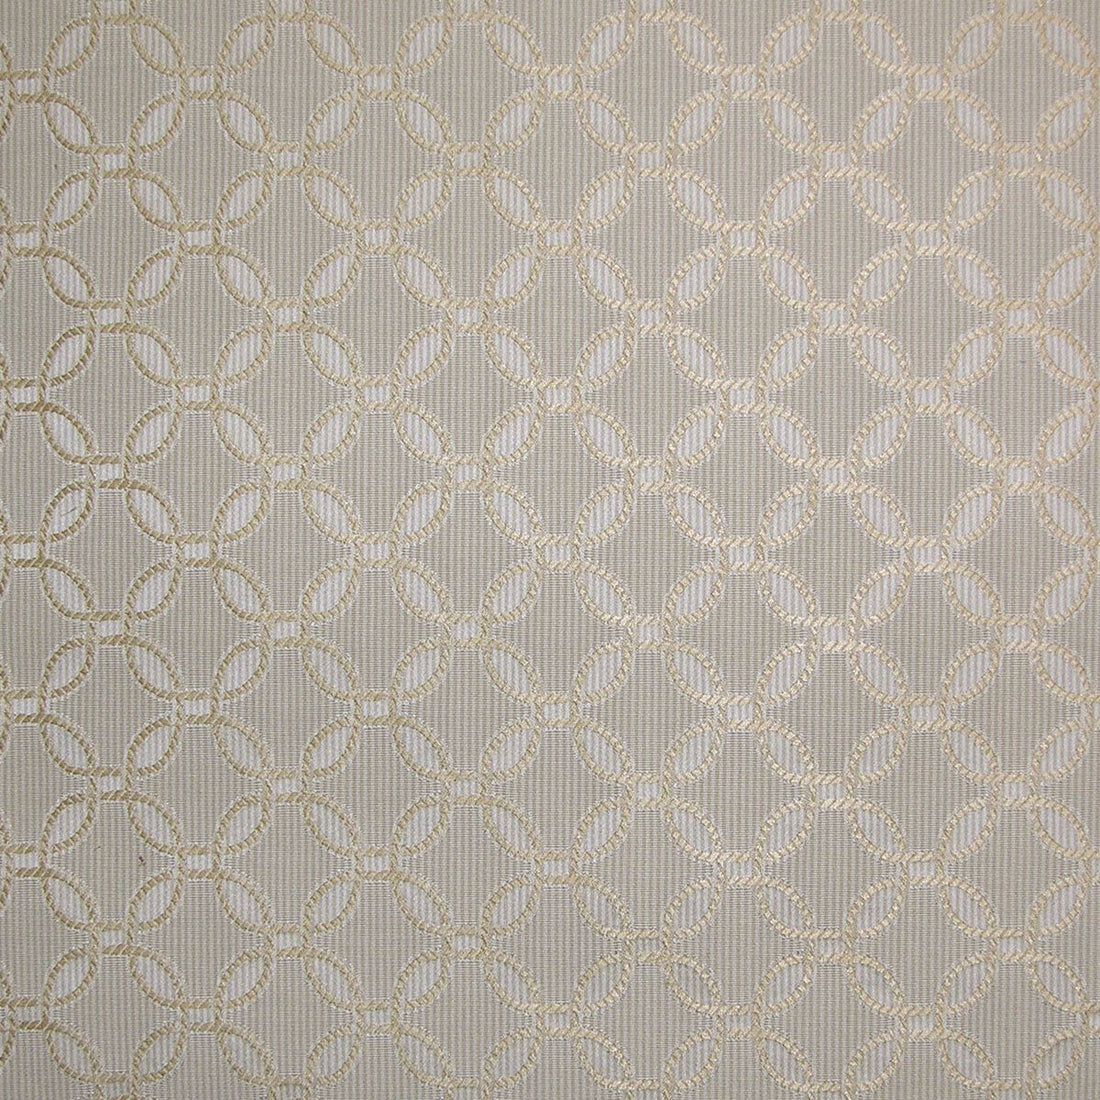 Epsom fabric in oyster color - pattern number TI 00774290 - by Scalamandre in the Old World Weavers collection